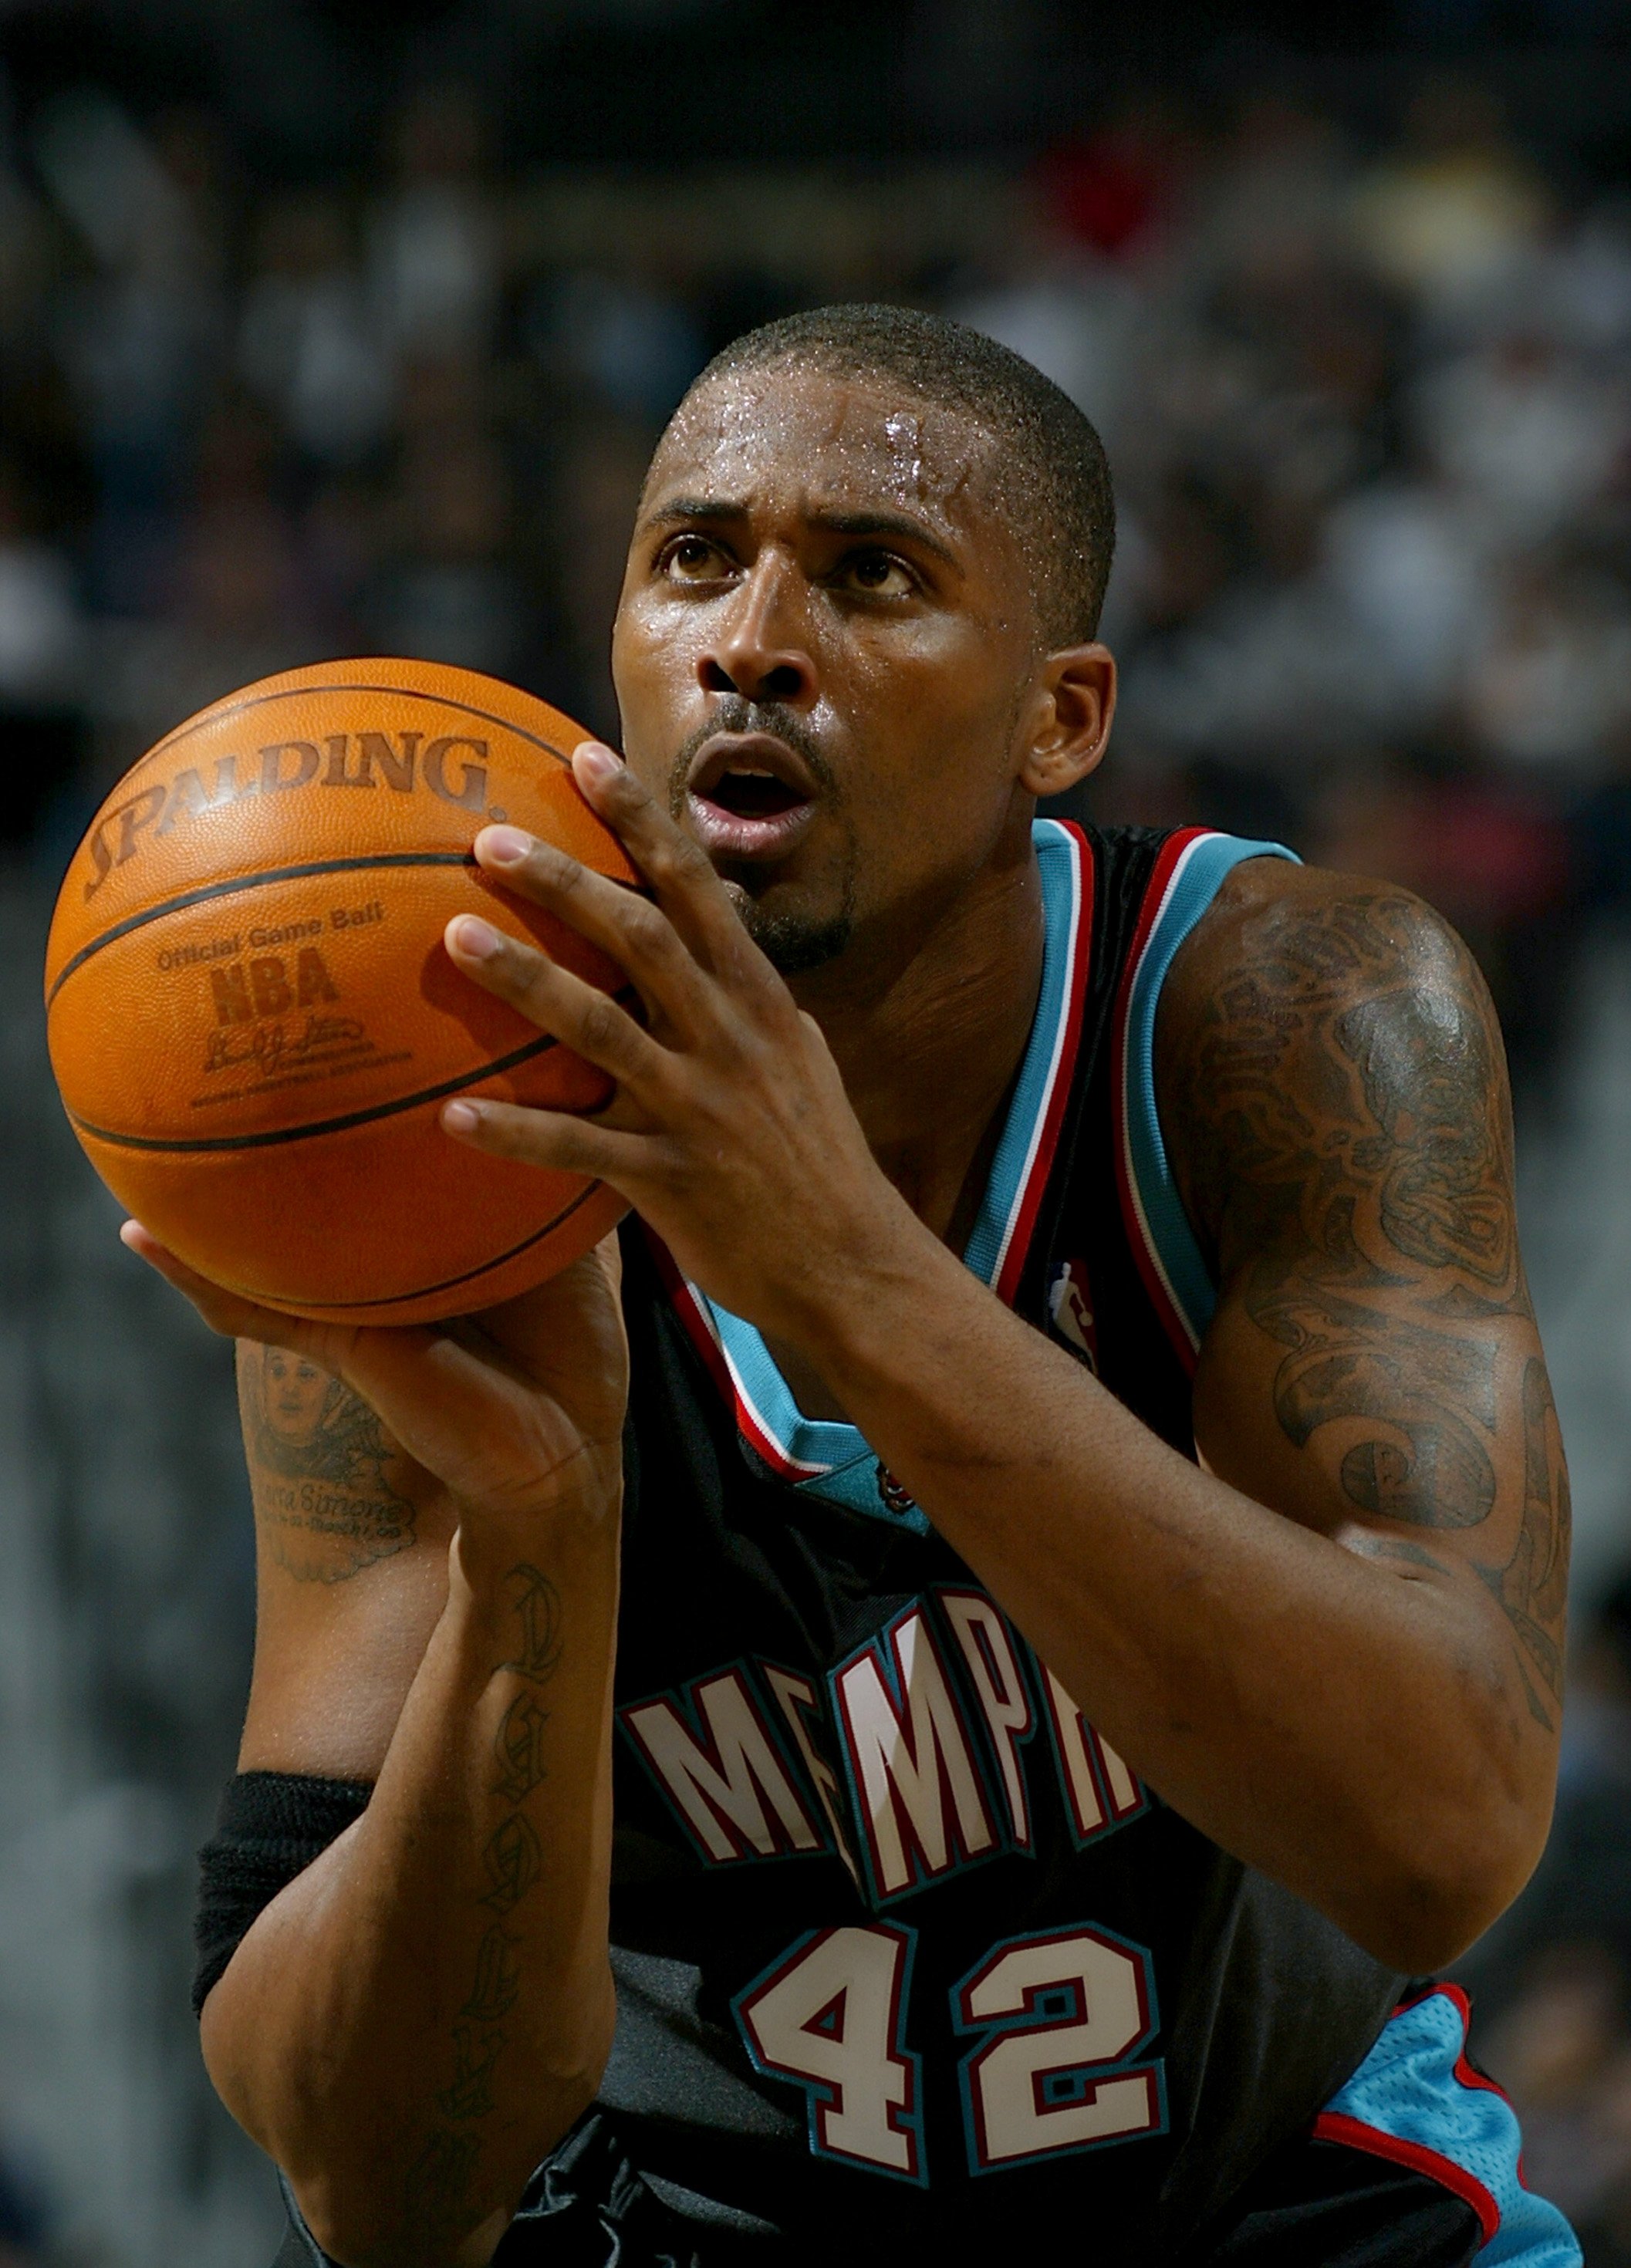 Lorenzen Wright of the Memphis Grizzlies shooting a free throw against the San Antonio Spurs in April, 2004 in San Antonio, Texas. | Source: Getty Images